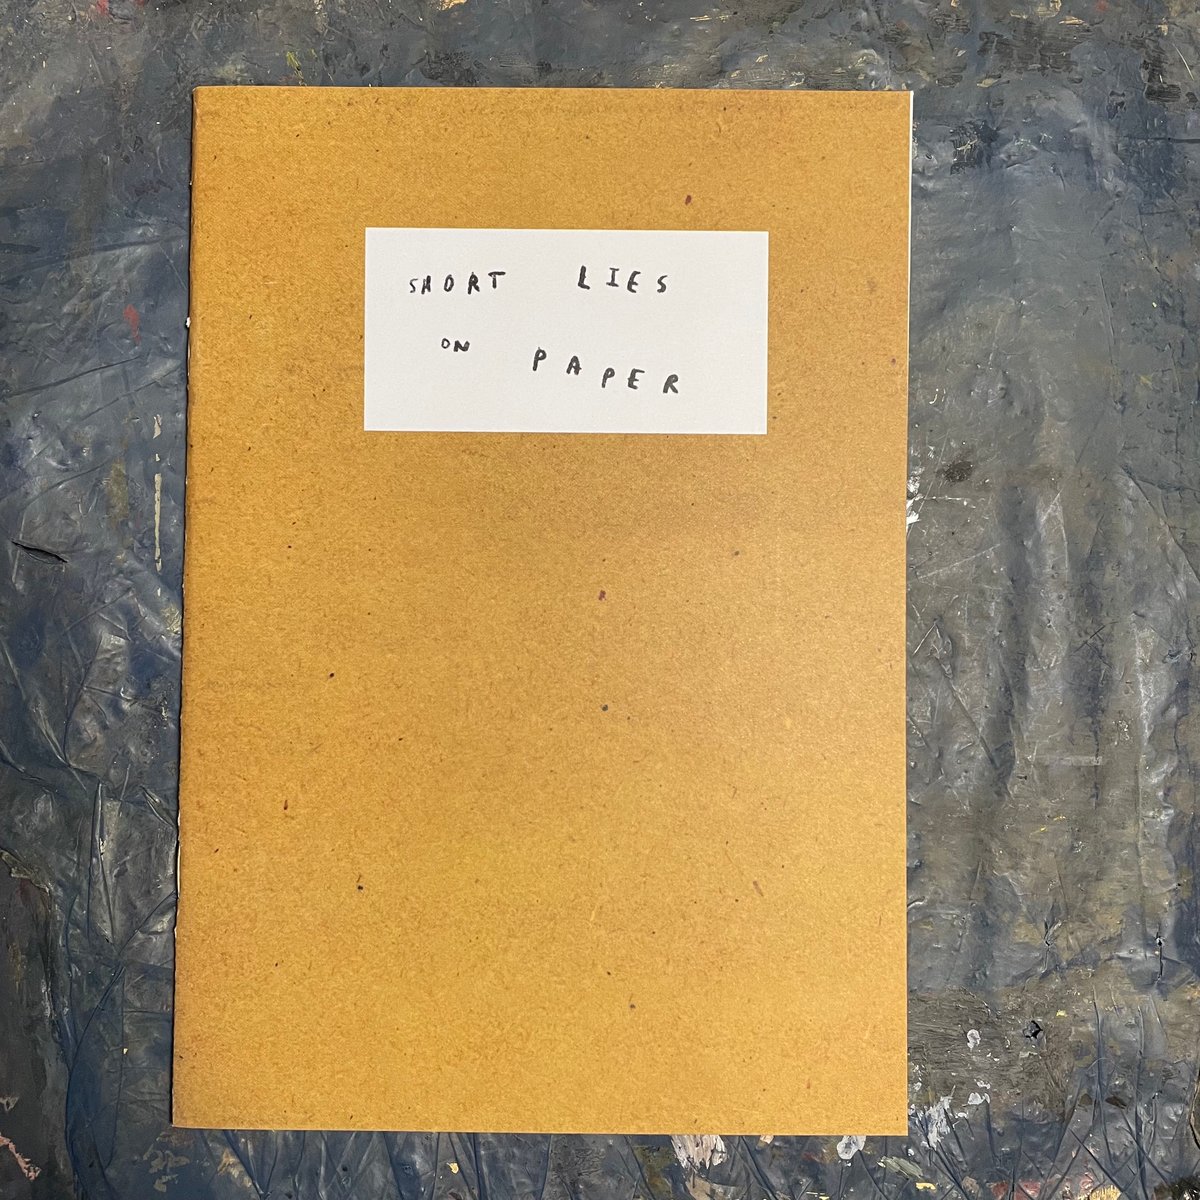 Short lies on paper (Volume two)